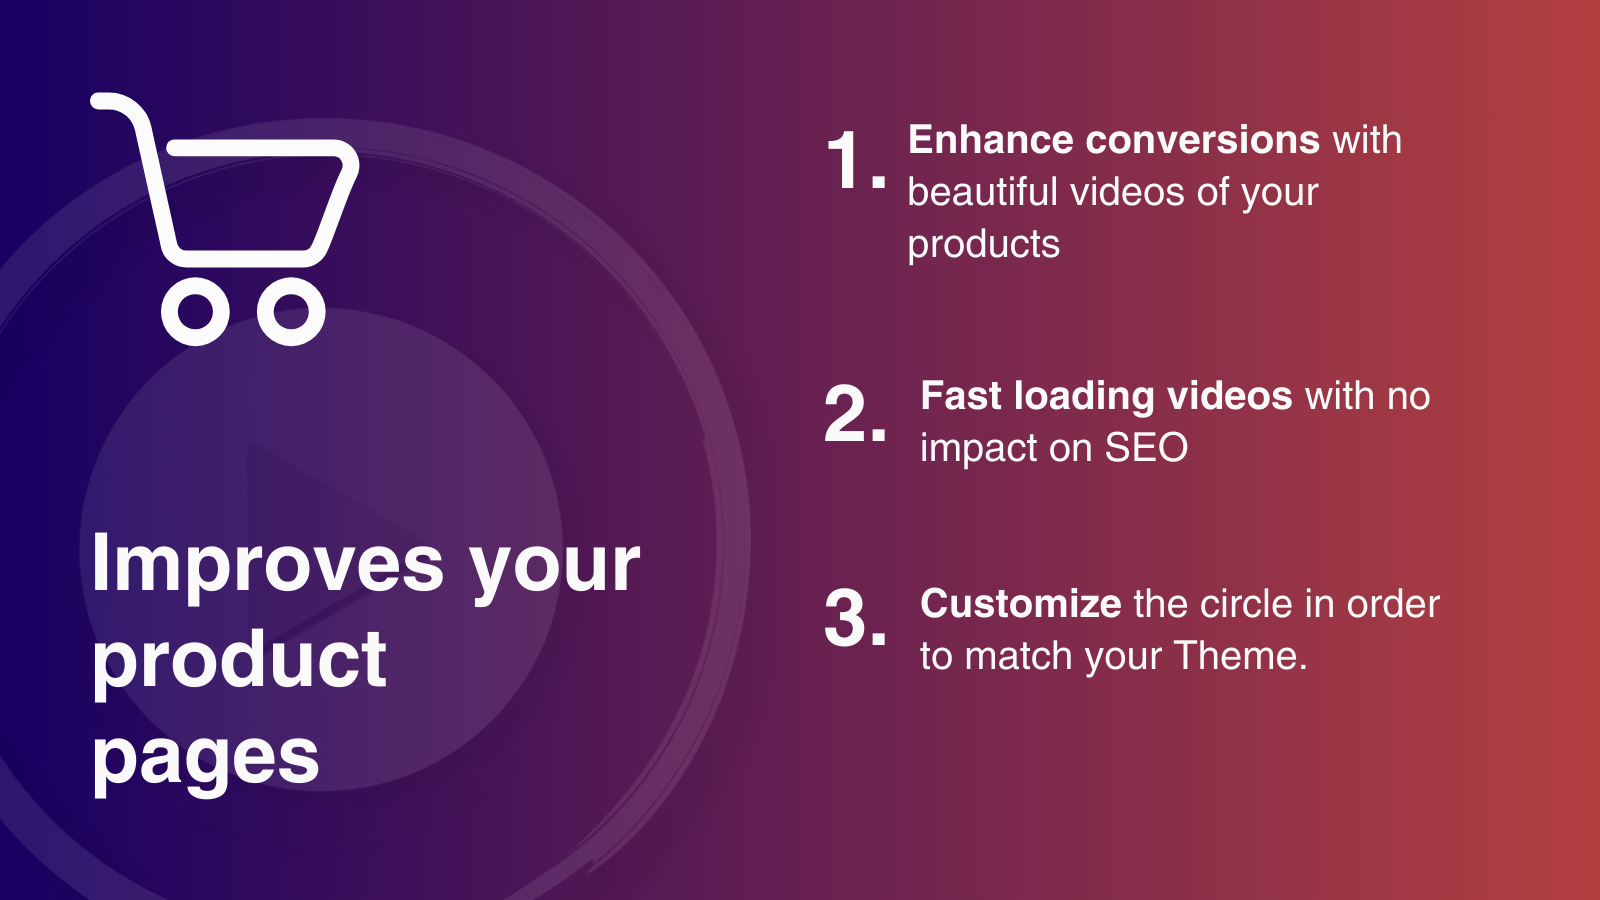 Enhance conversions with beautiful videos of your products